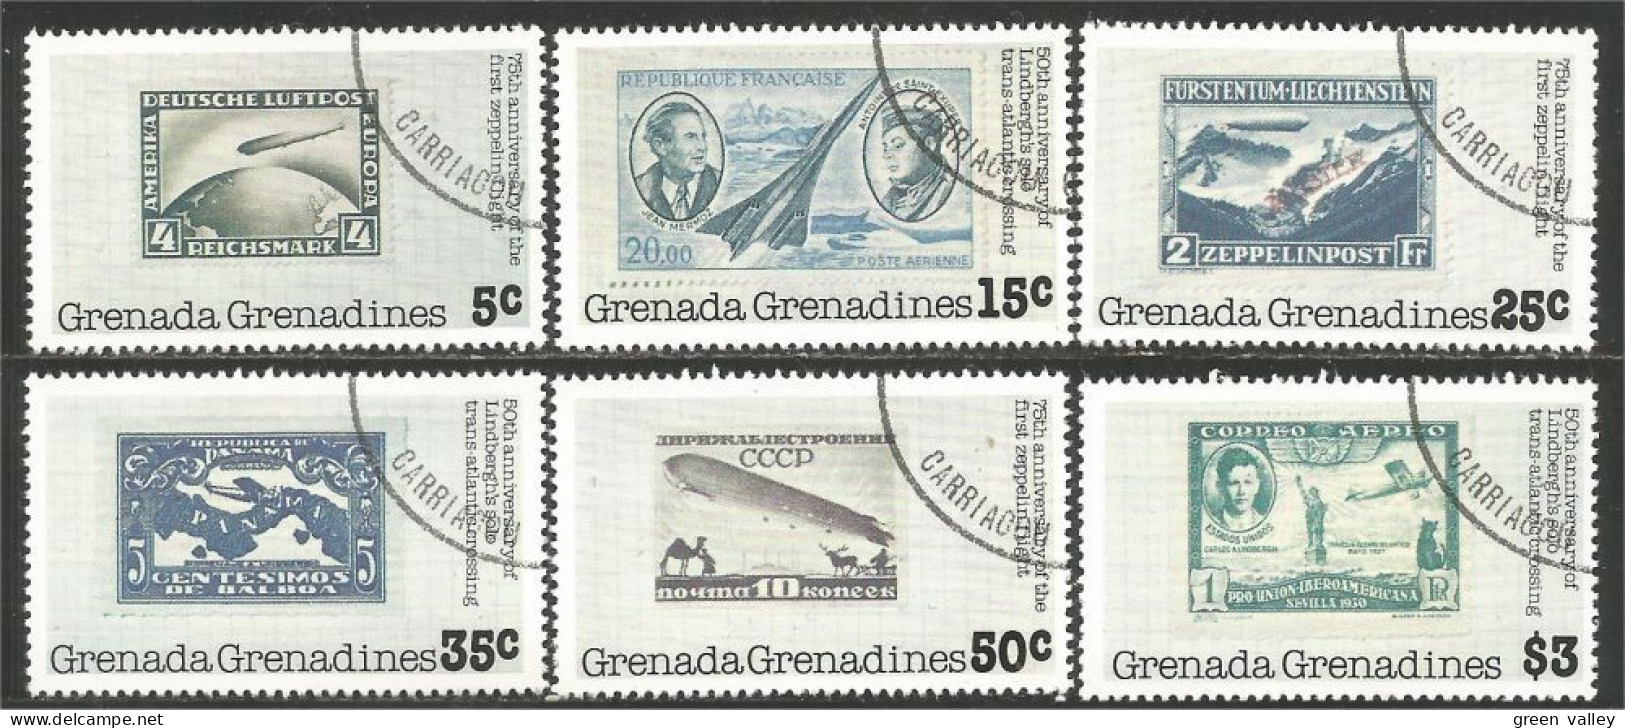 TT-27 Grenada Timbres Sur Timbres Stamps On Stamps - Stamps On Stamps